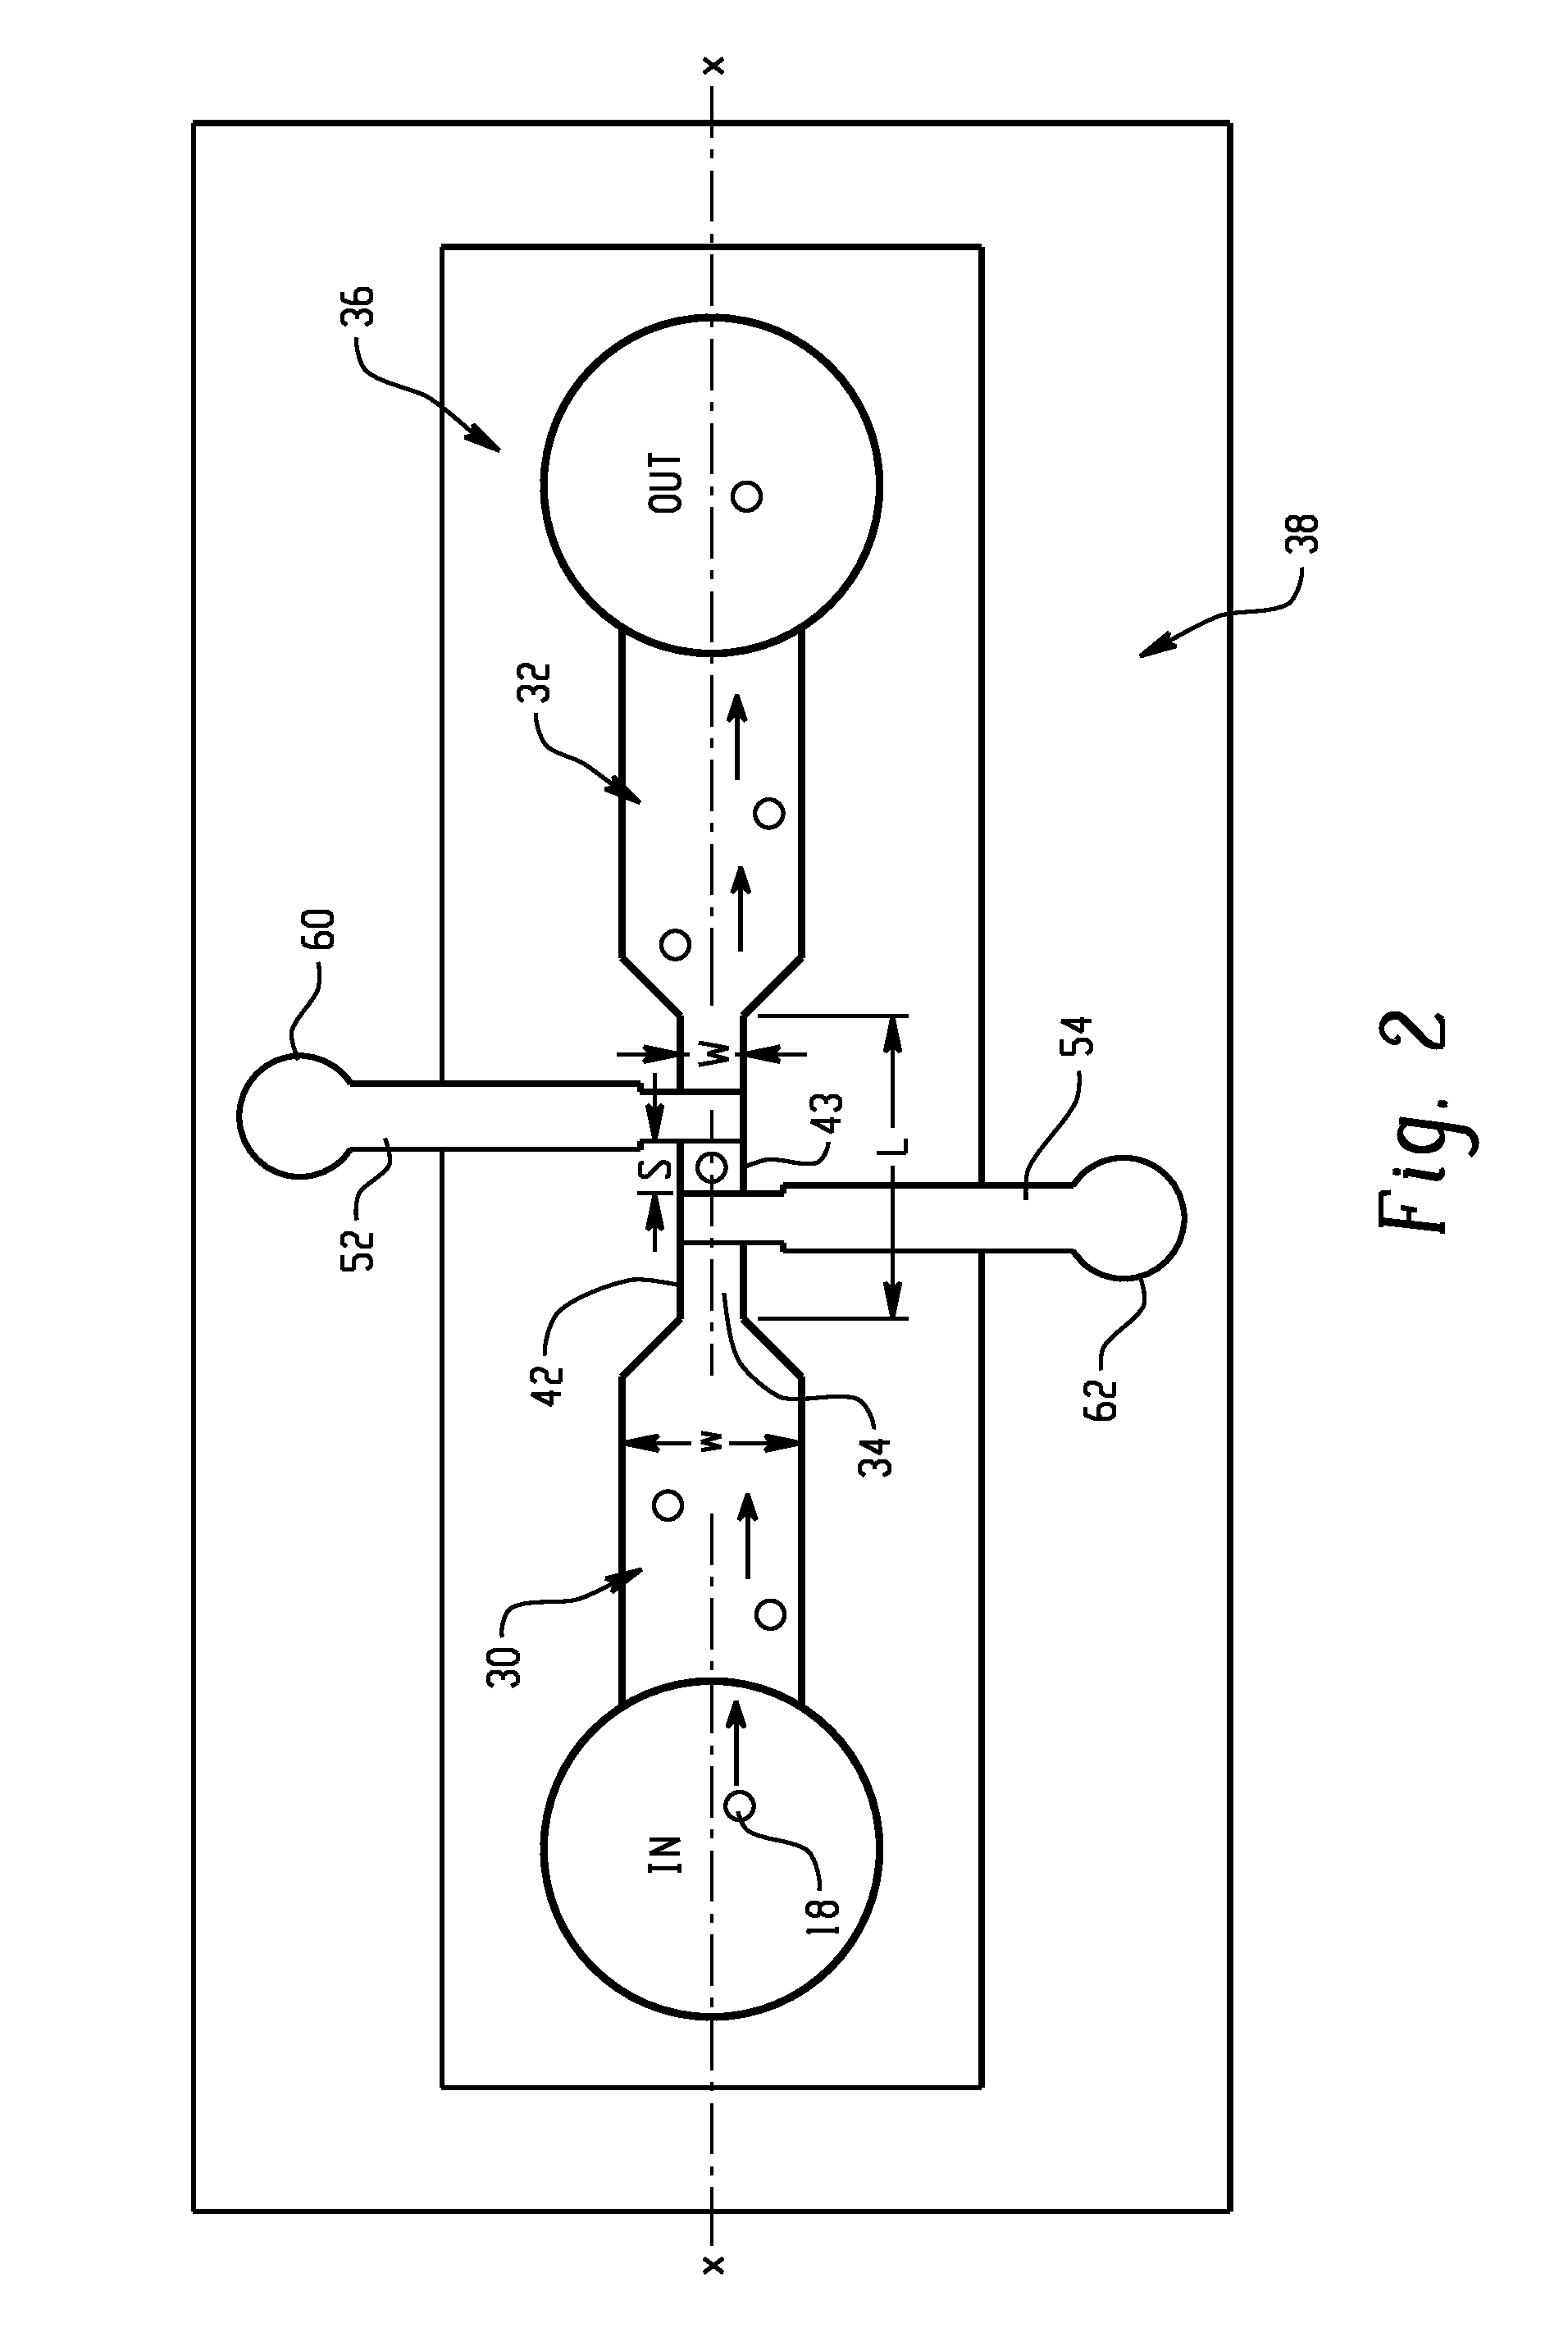 Metal wear detection apparatus and method employing microfluidic electronic device